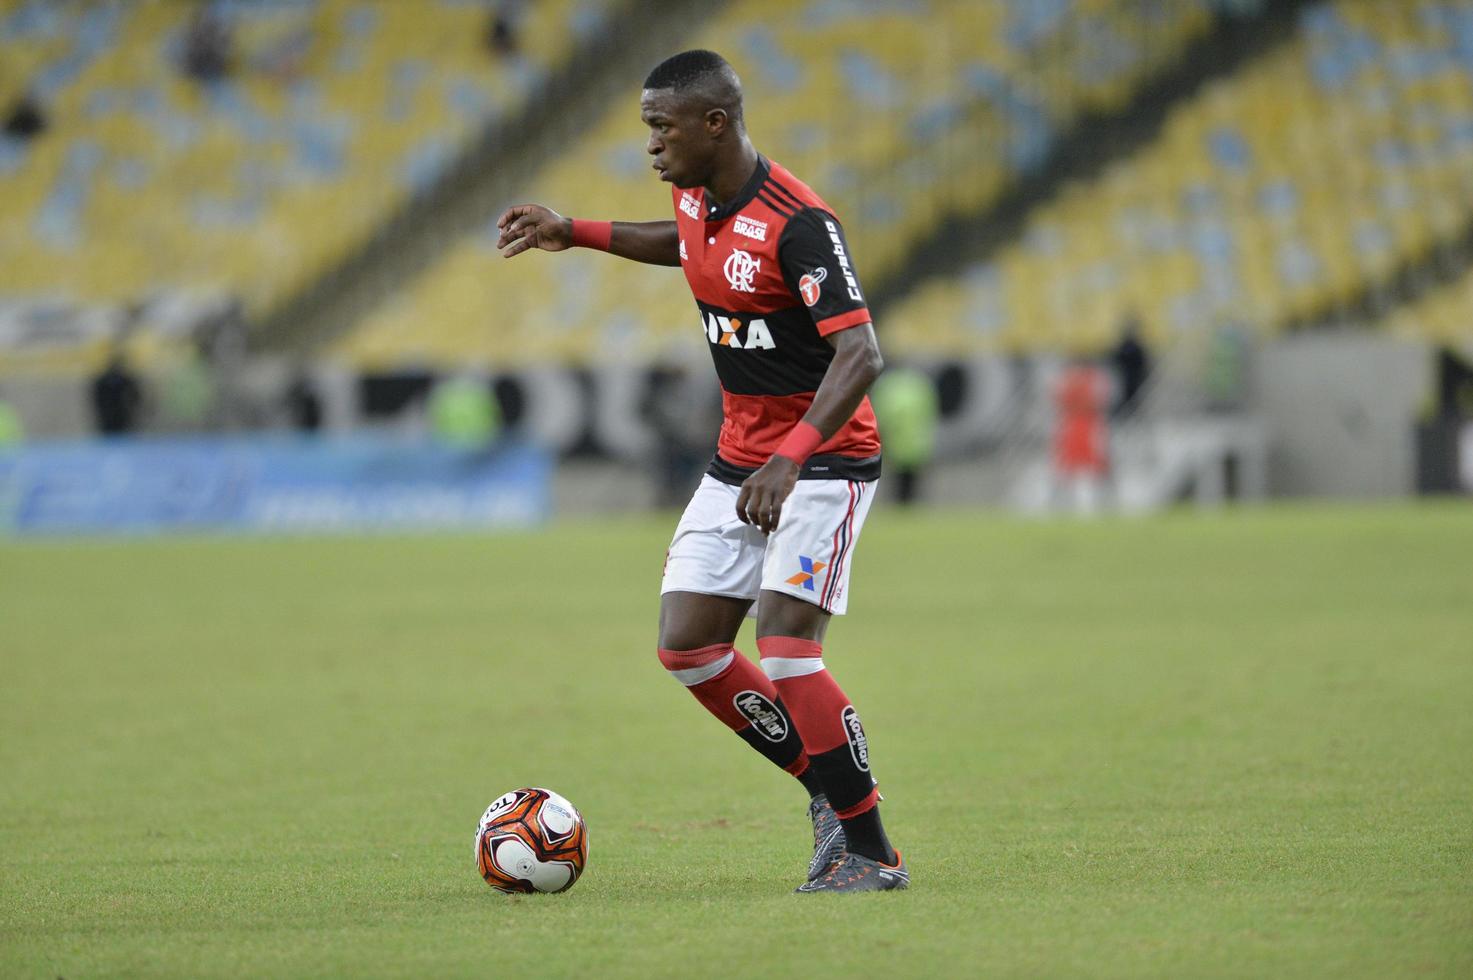 Rio, Brazil - march 28, 2018 -  Vinicius Junior player in match between Flamengo and Botafogo by the Carioca Championship in Maracana Stadium photo